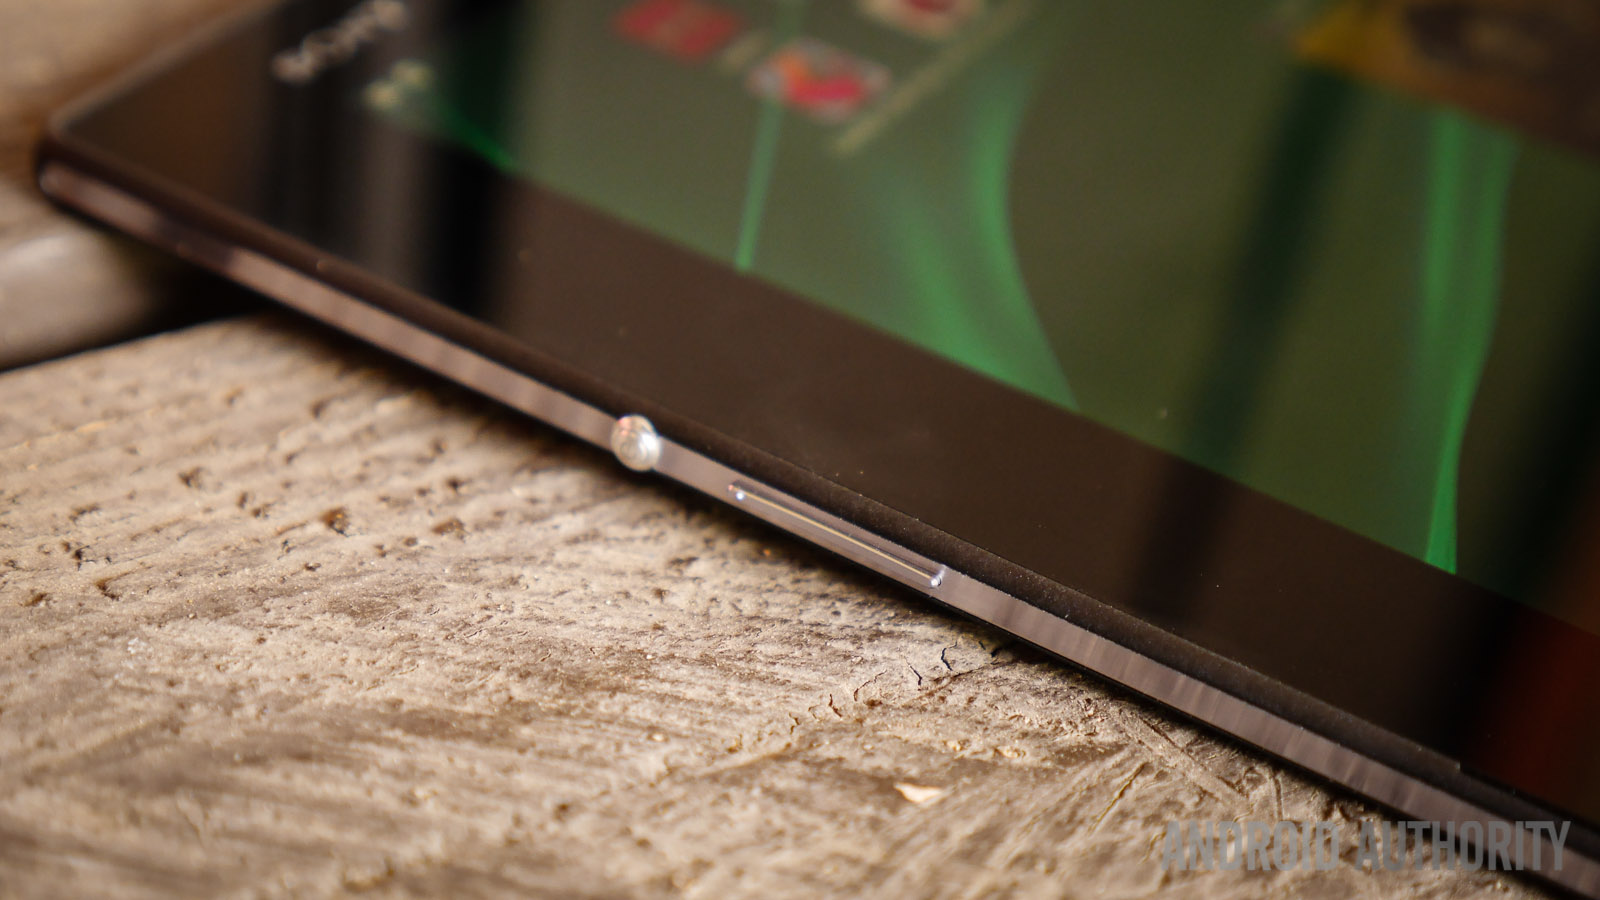 sony xperia z2 tablet review (4 of 17)